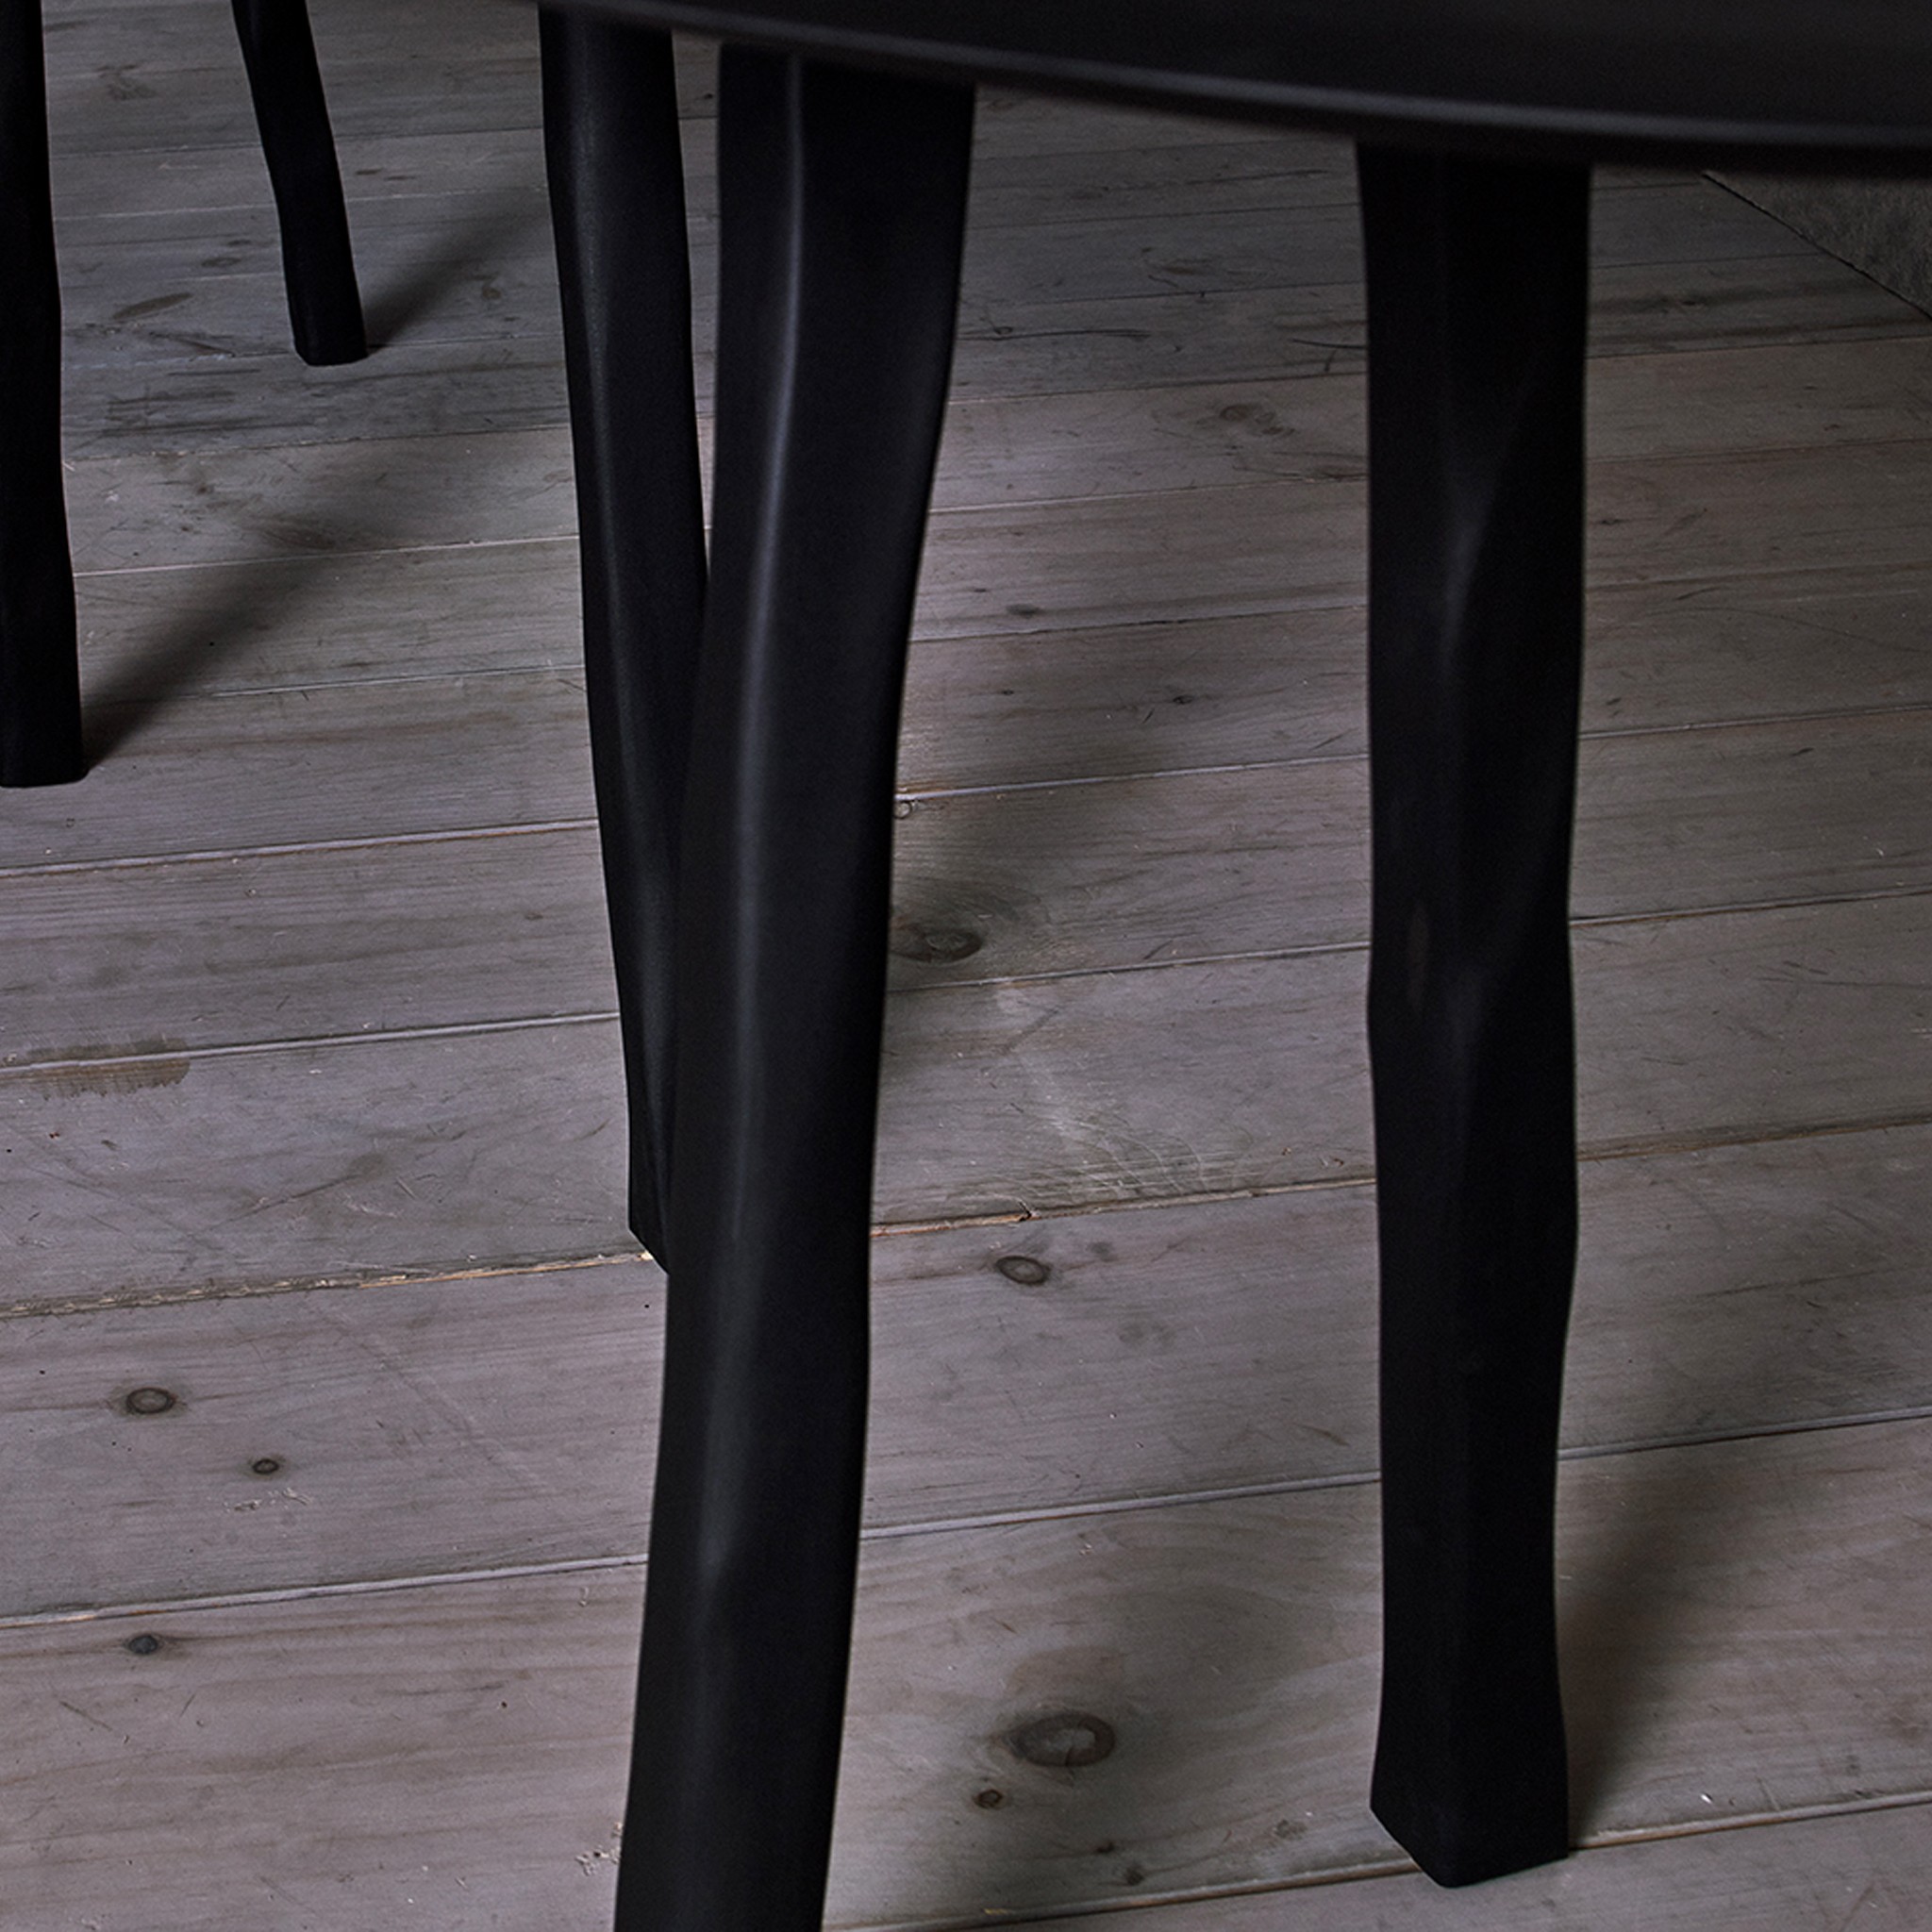 a close up of a black chair on a wooden floor